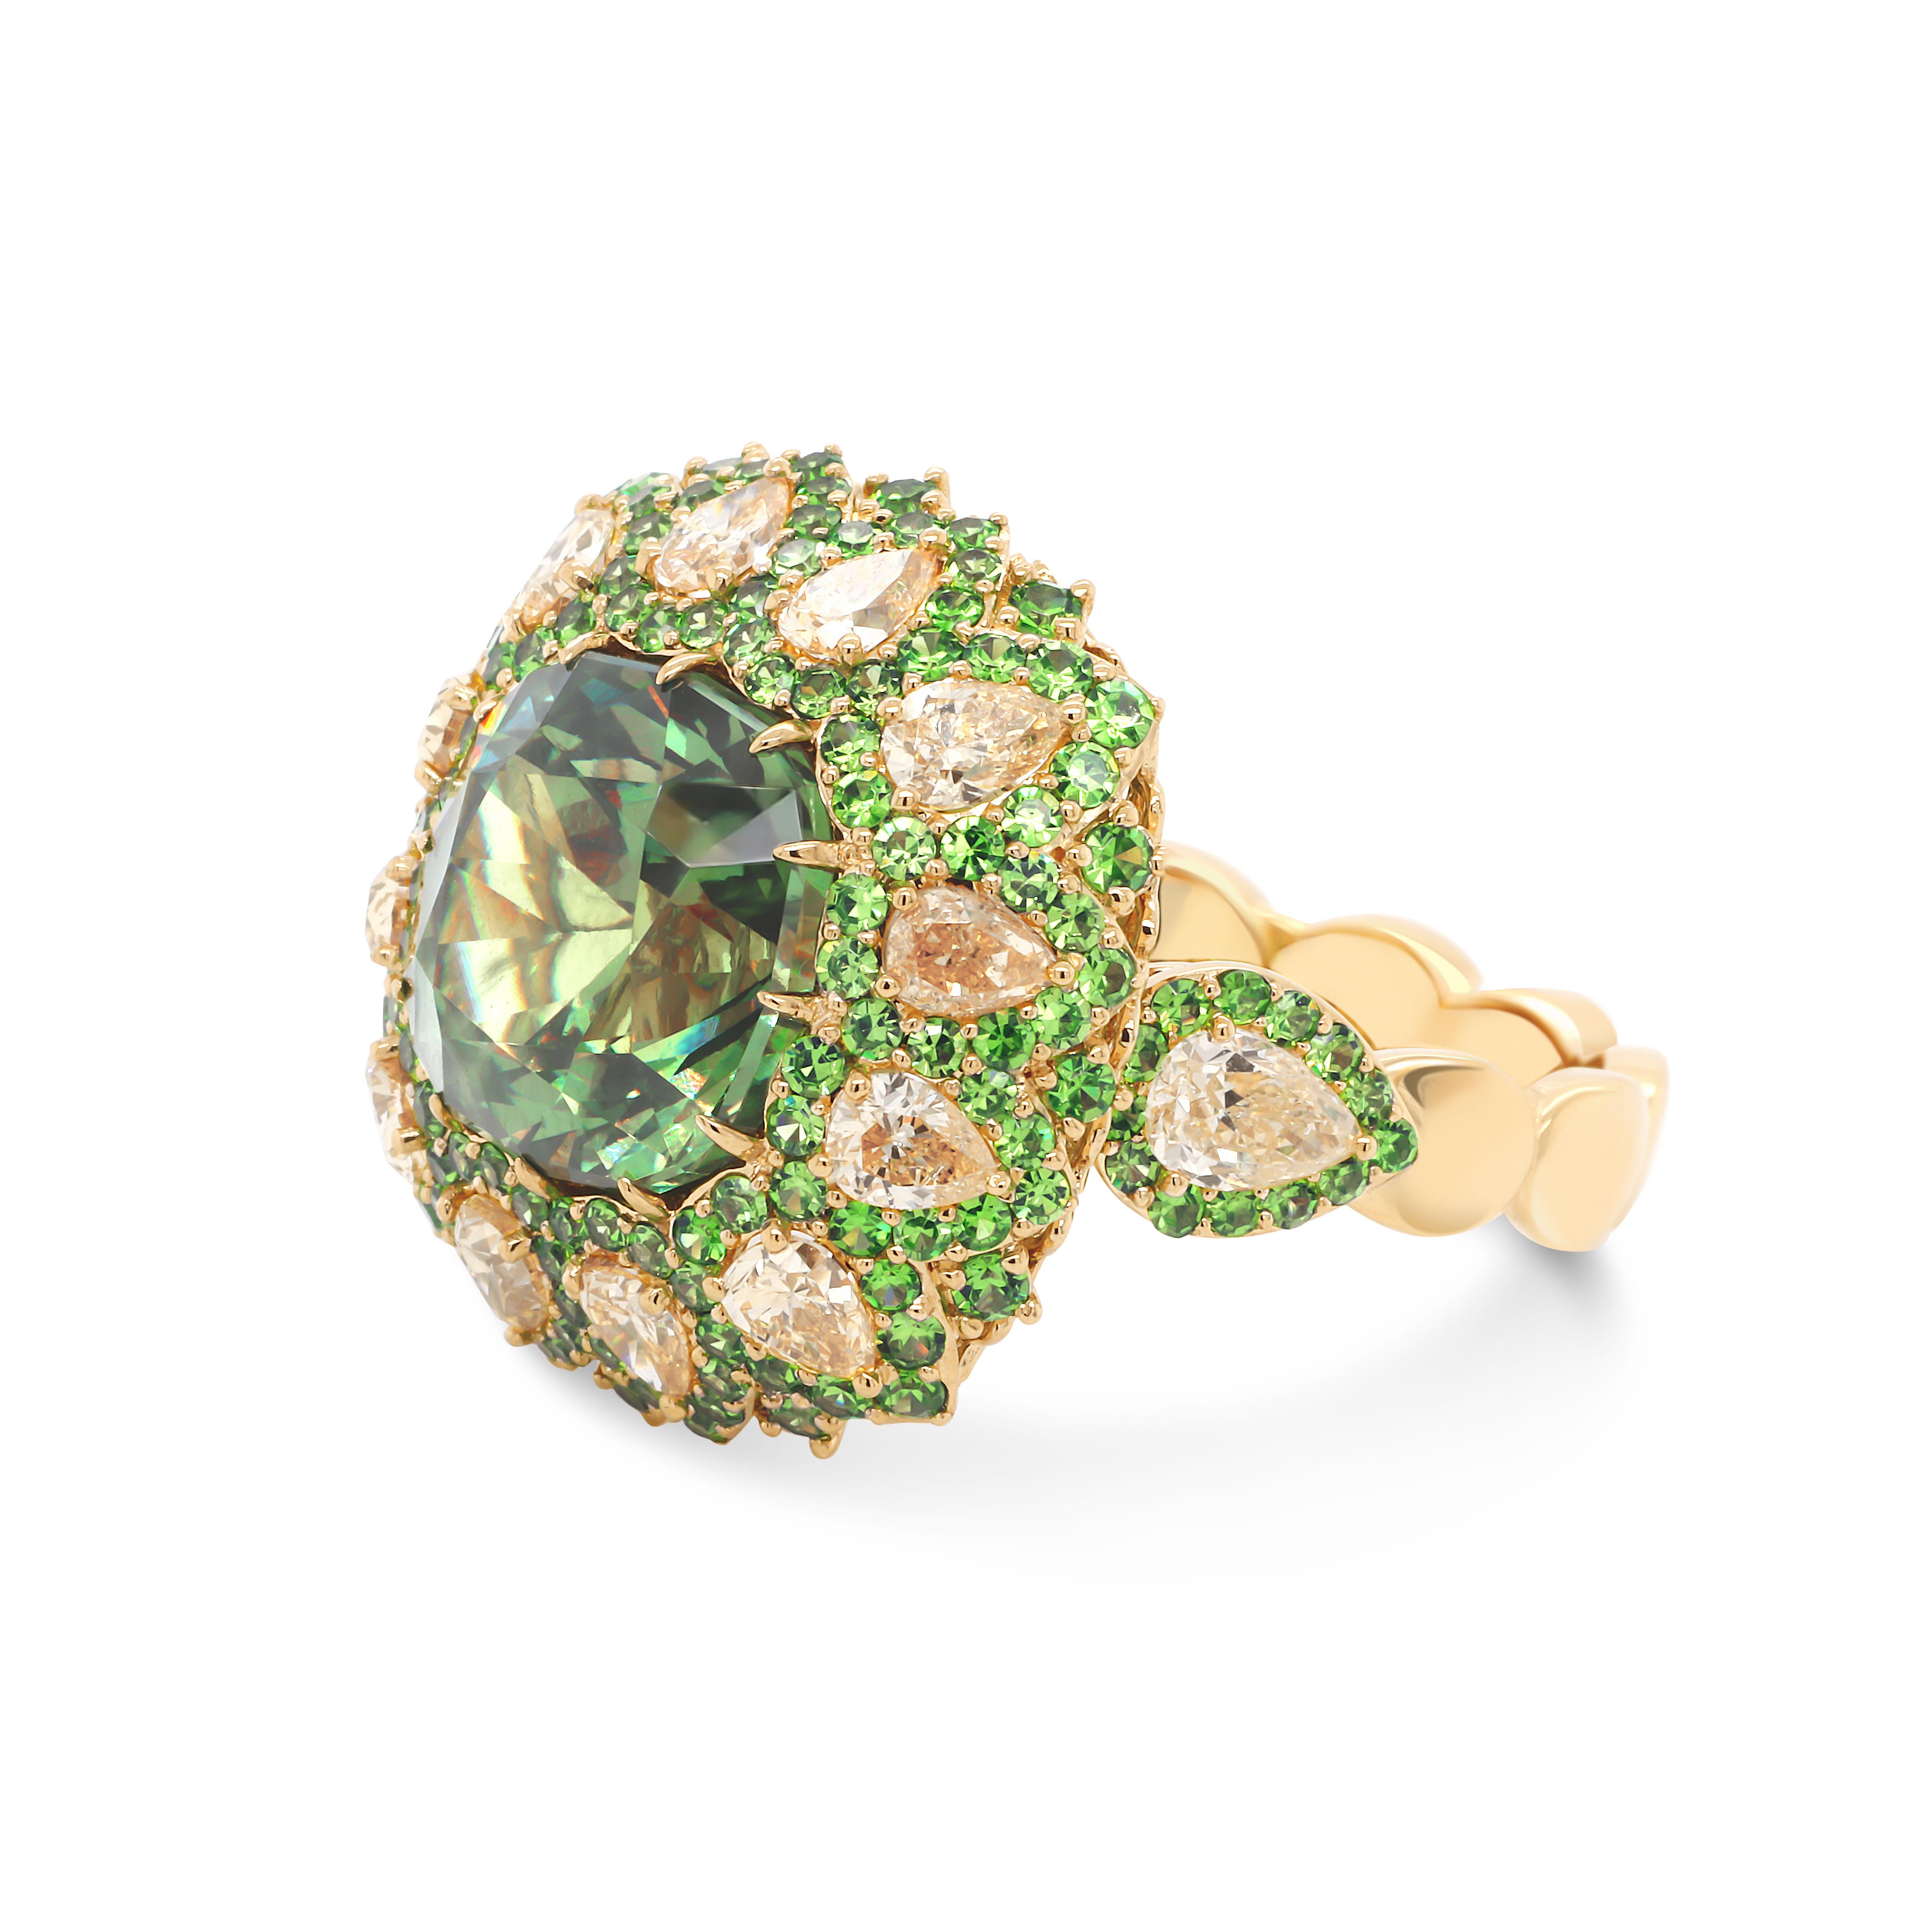 Luxurious 18 Karat Gold Ring featured rare 5.82 ct Russian Demantoid accented with Yellow pear cut Diamonds 1.48 ctw and round Demantoids 1.11 ctw. 
Demantoid is called a star of garnets, it's name means diamond-like stone and it's truly is! An